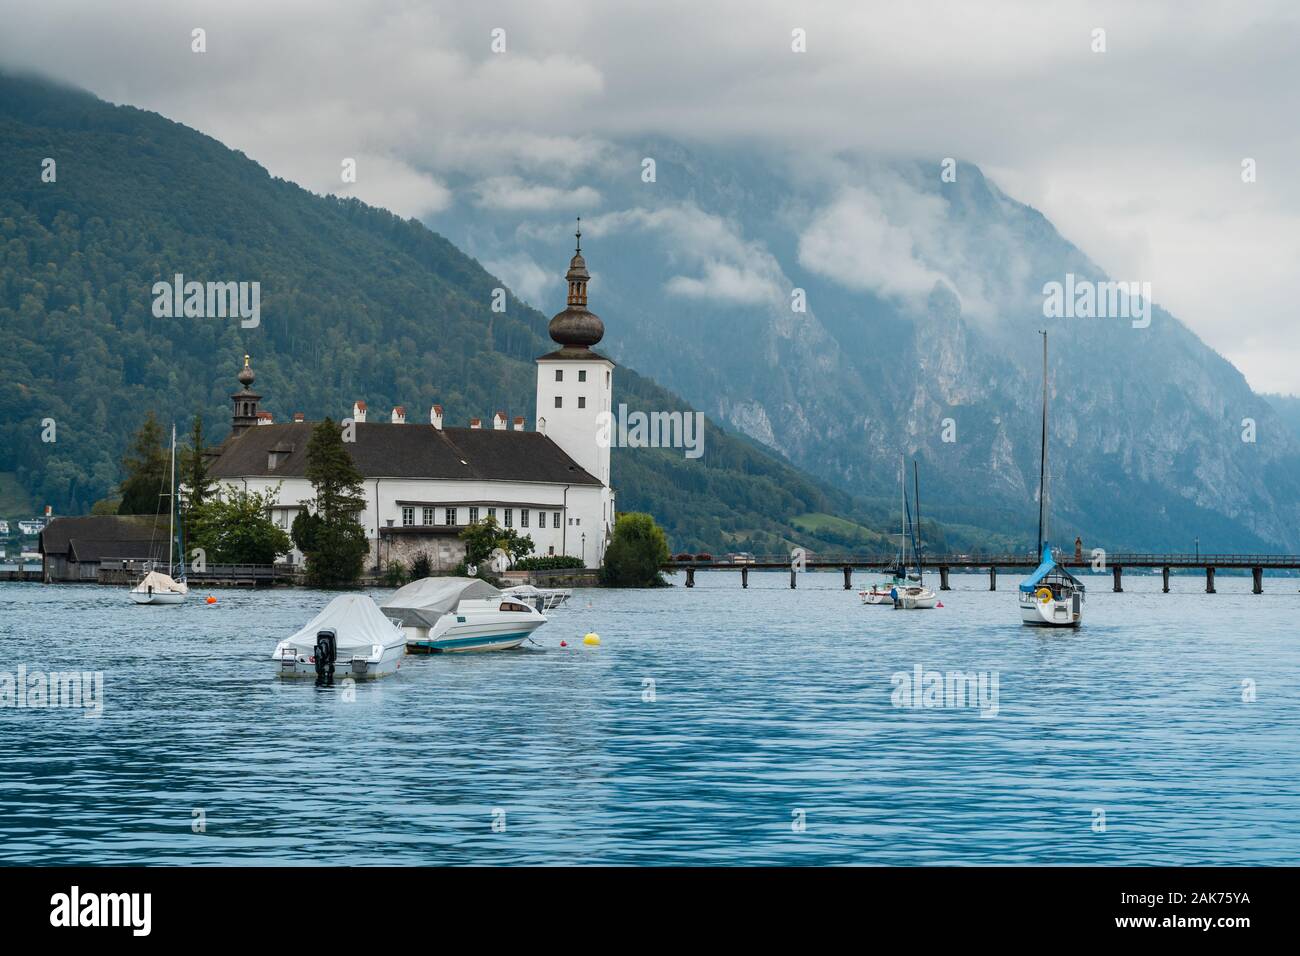 Gmunden is a scenic town of the Austrian Alps located in the upper Austria. Perfect holiday destination for an adventure in Europe. Tourism in Austria Stock Photo